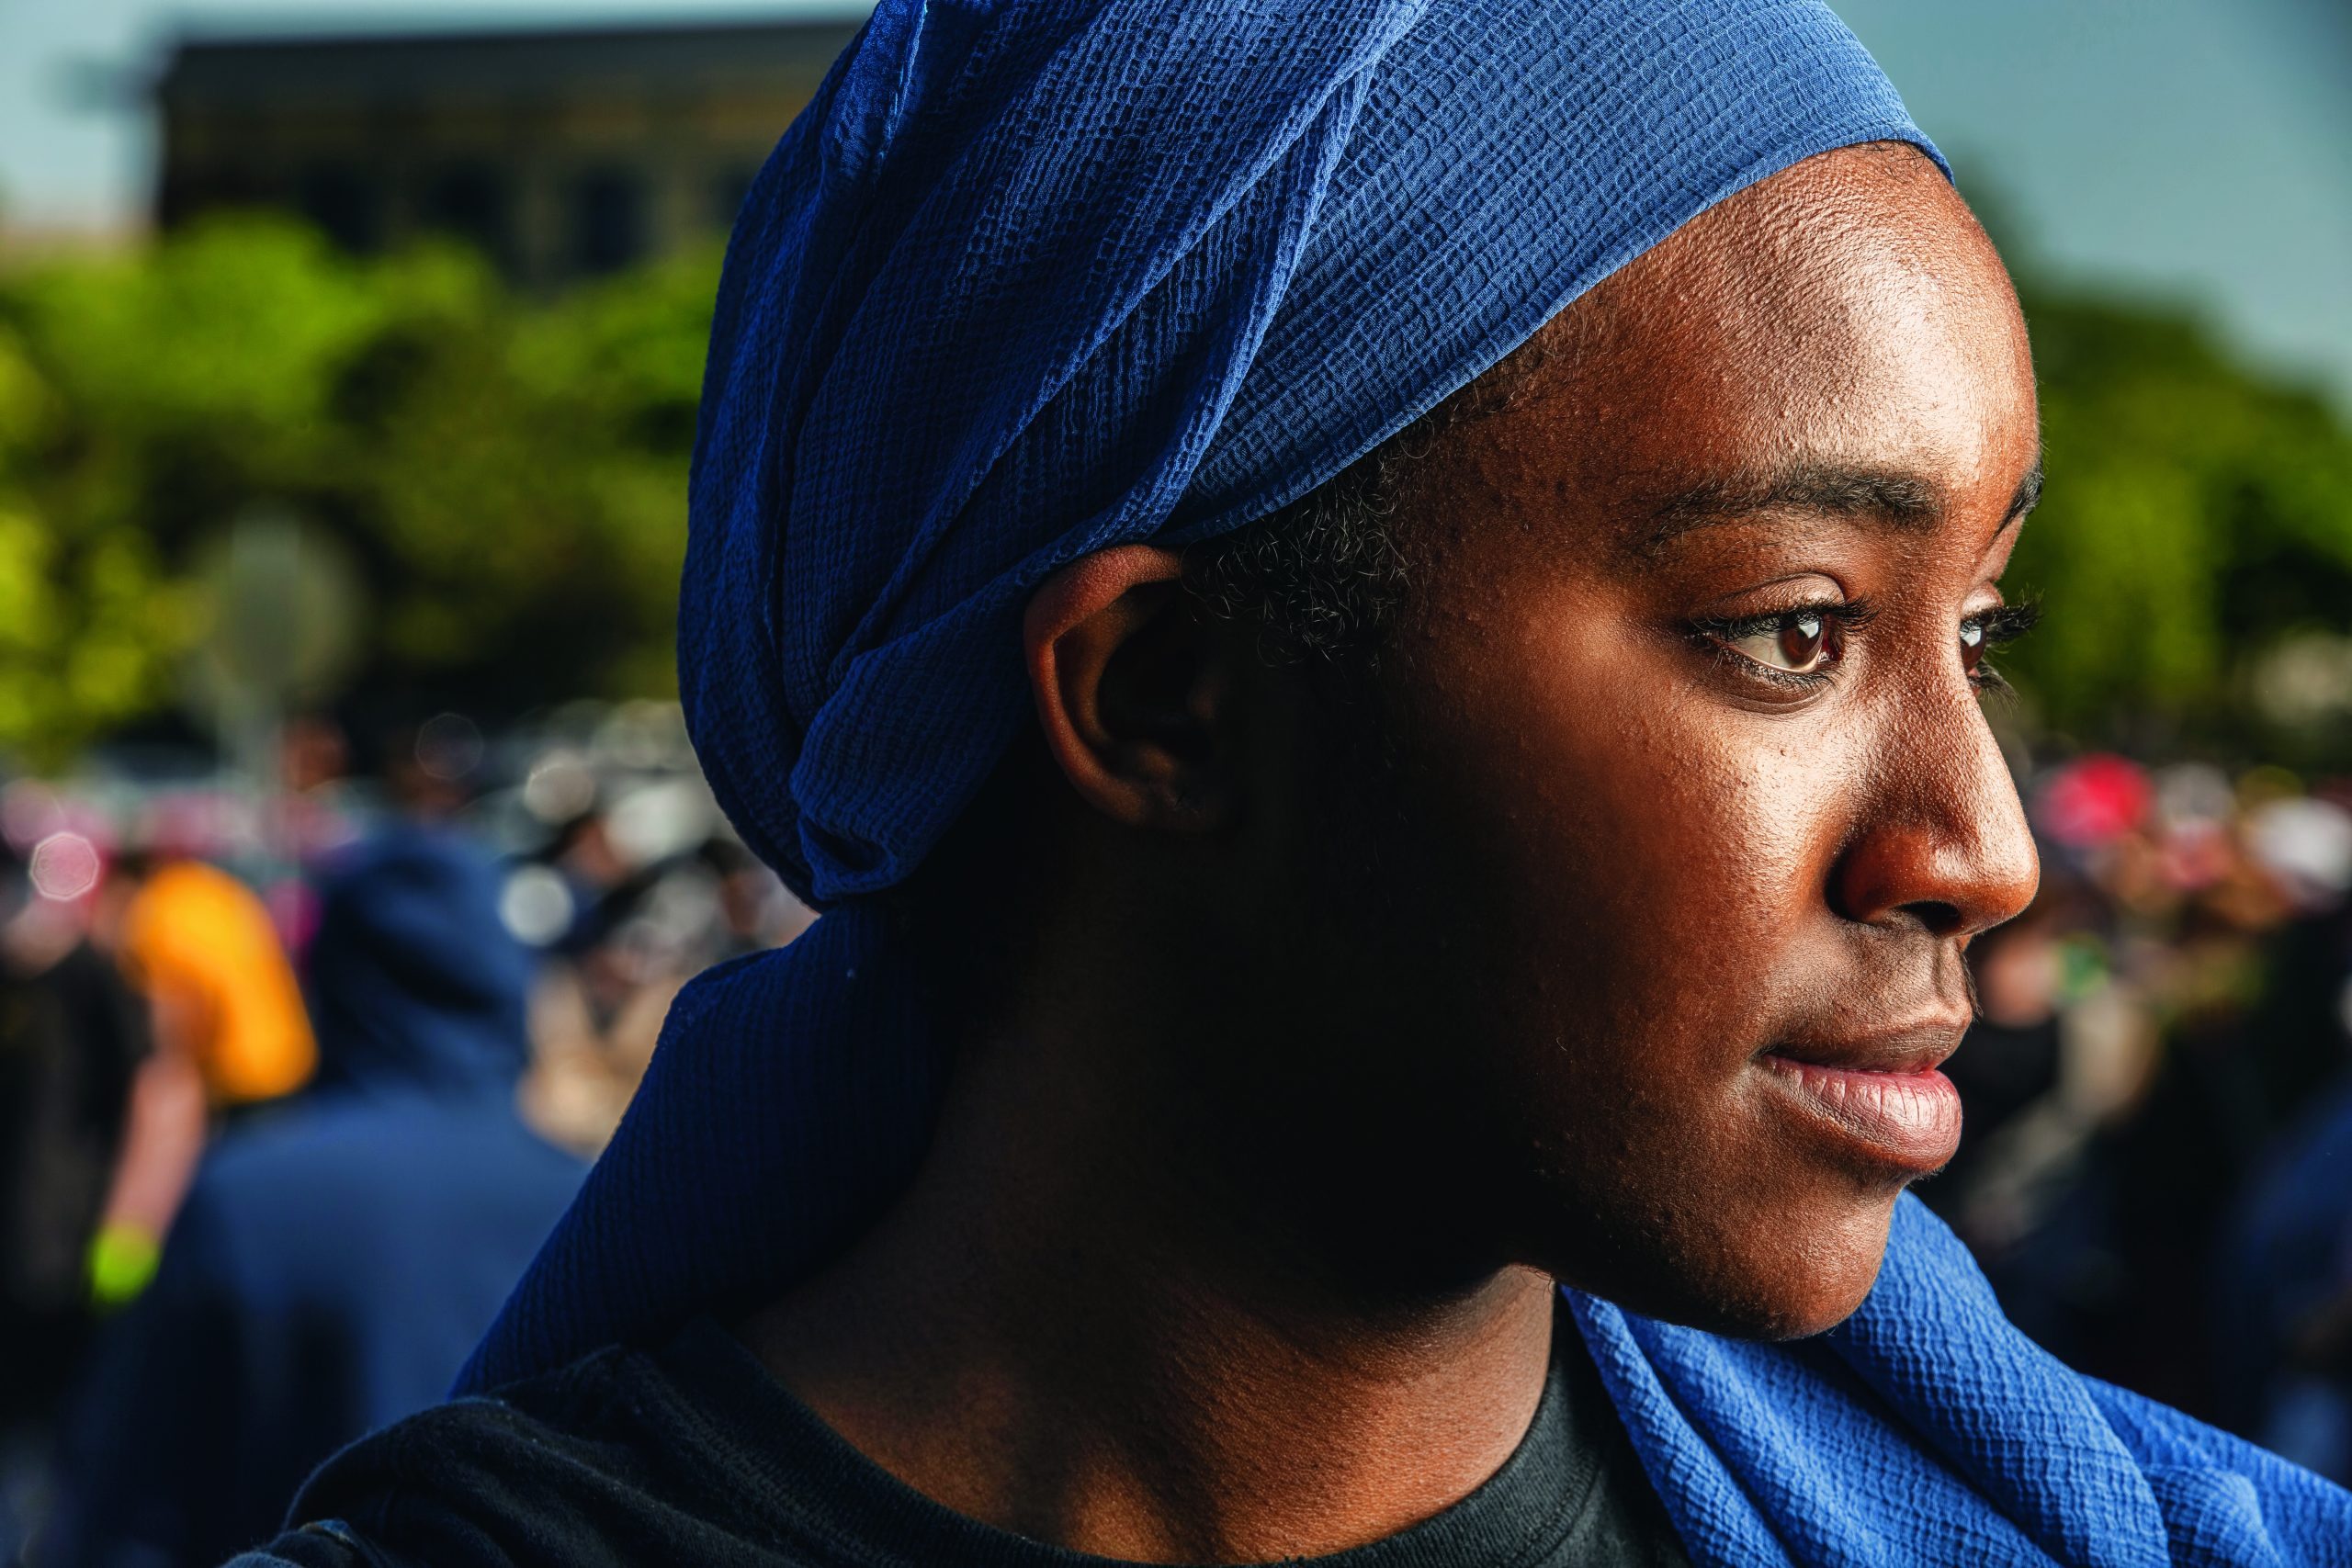 A Black woman wears a pale blue scarf over her head